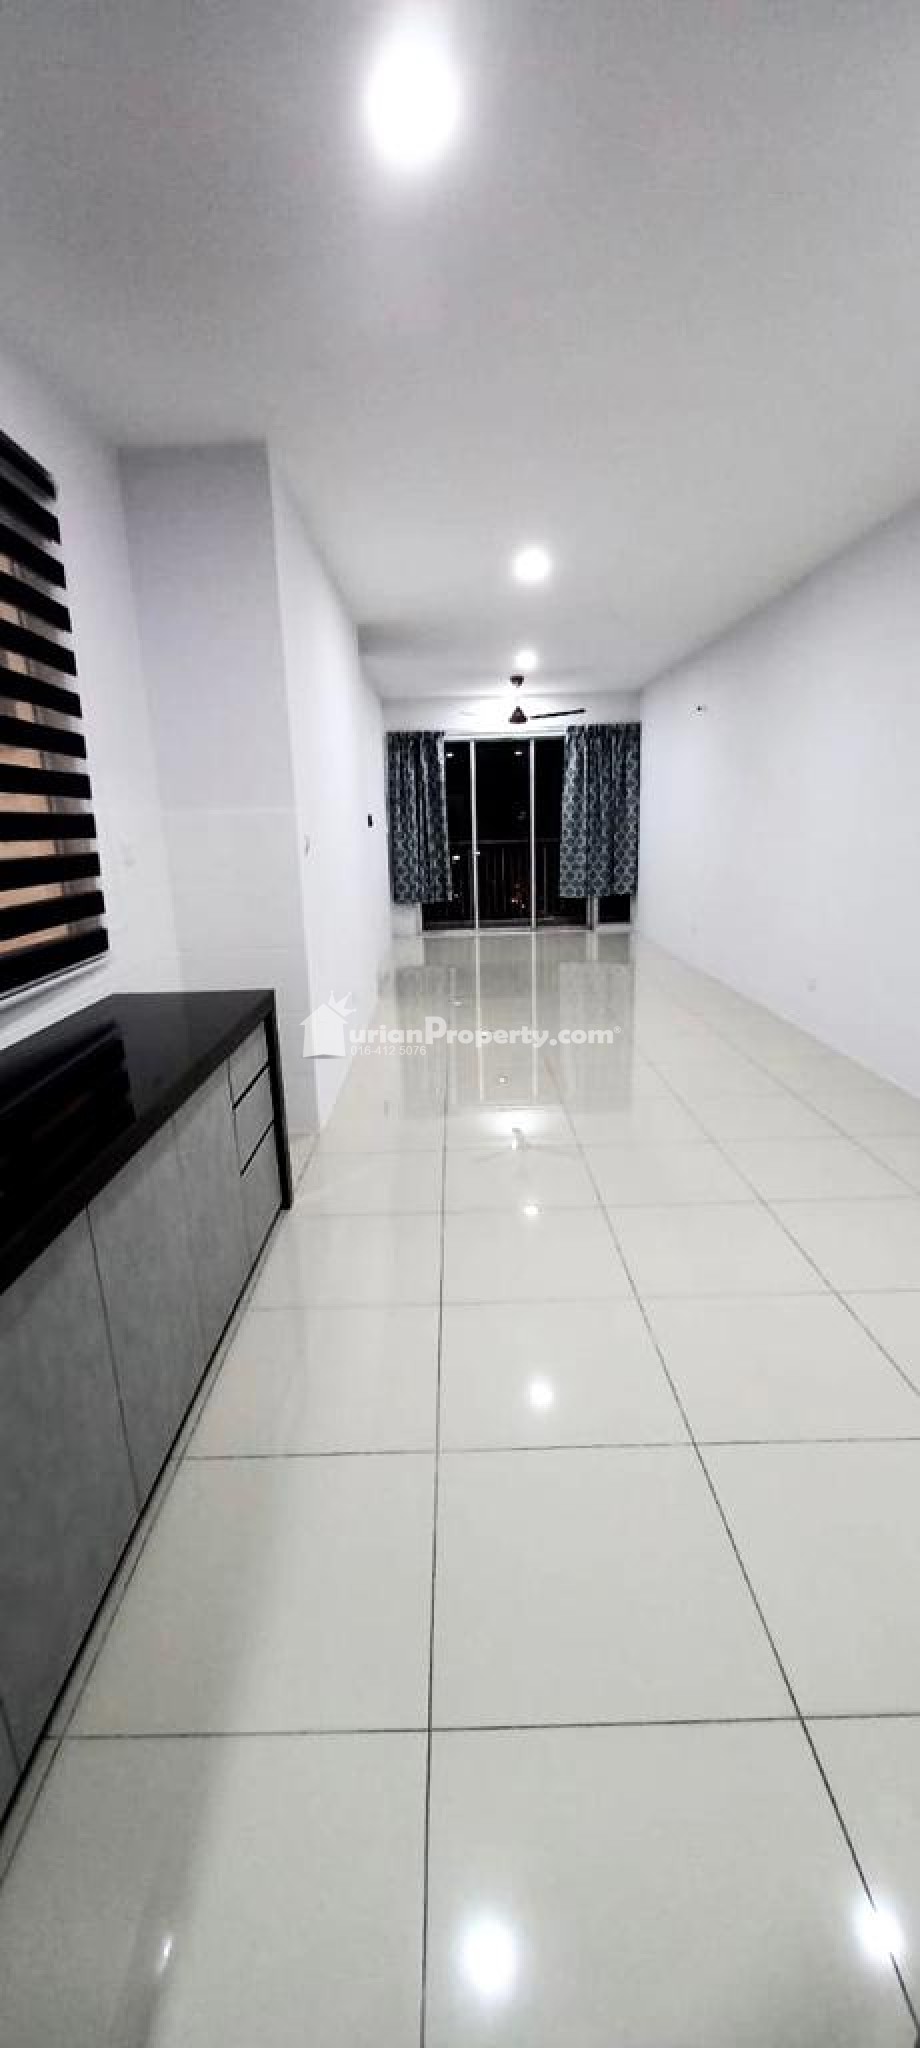 Condo For Sale at PV 18 Residence